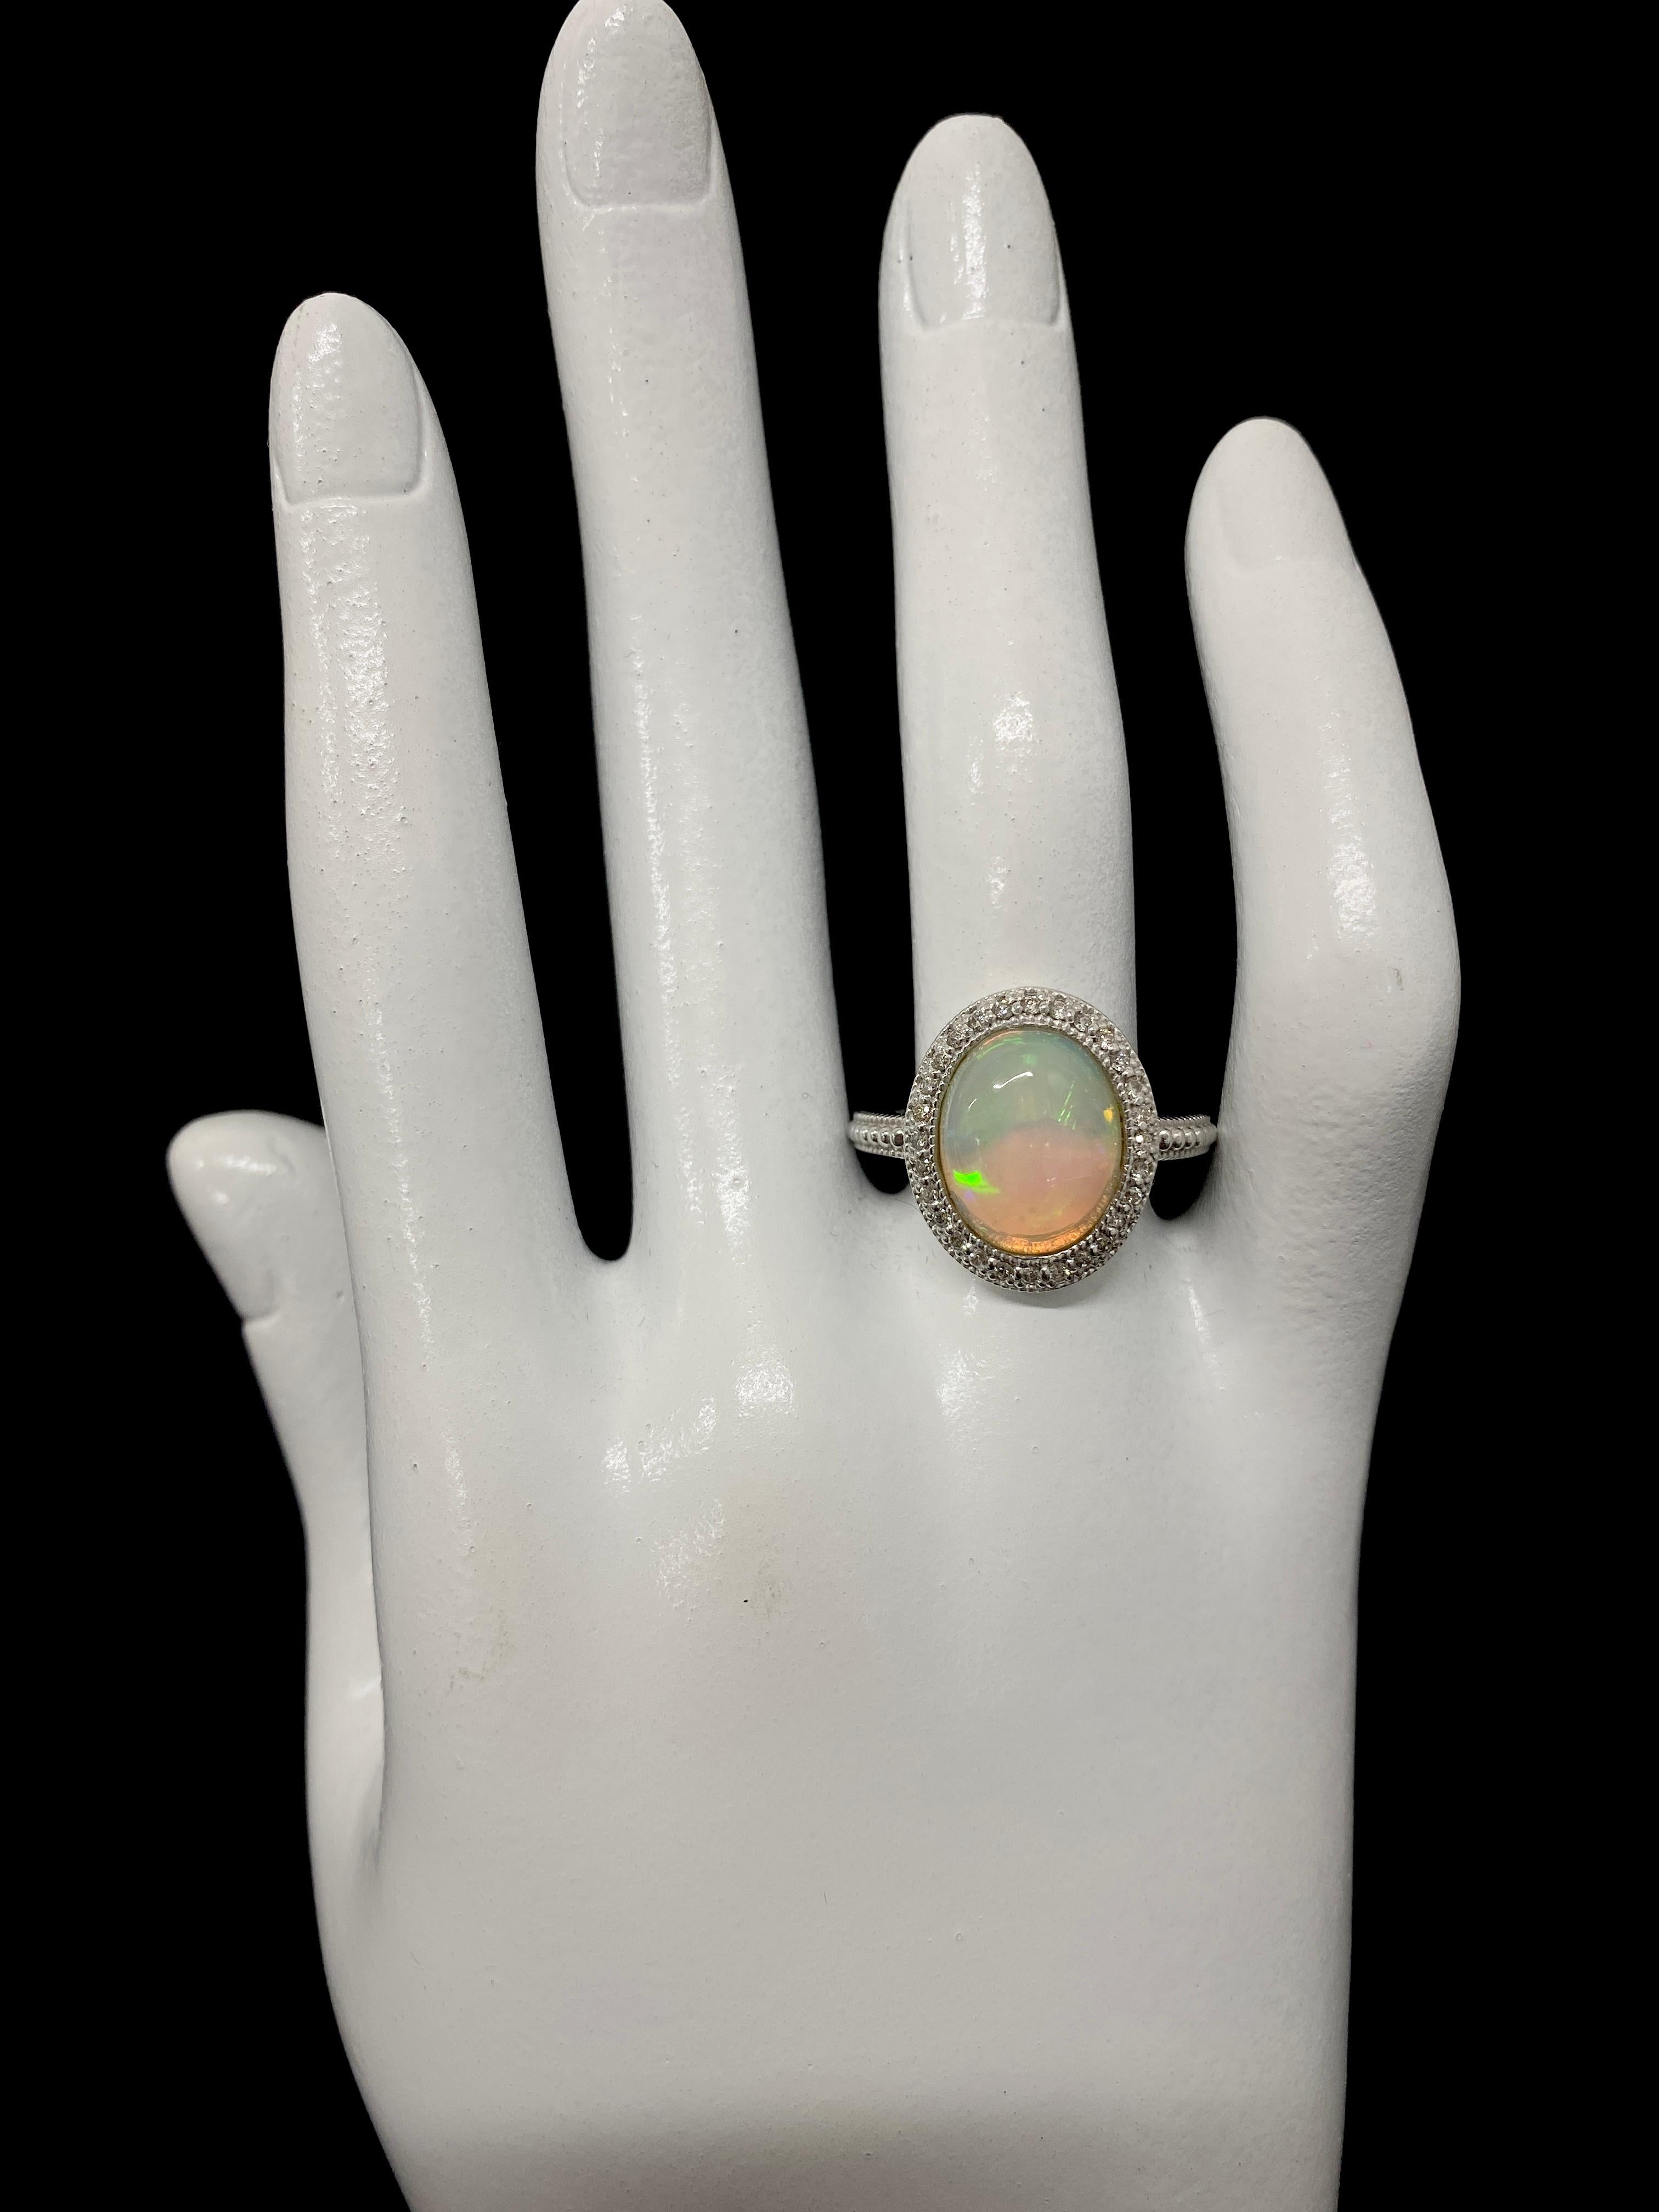 3.54 Carat Natural White Opal and Diamond Vintage Ring Set in 18K White Gold 1